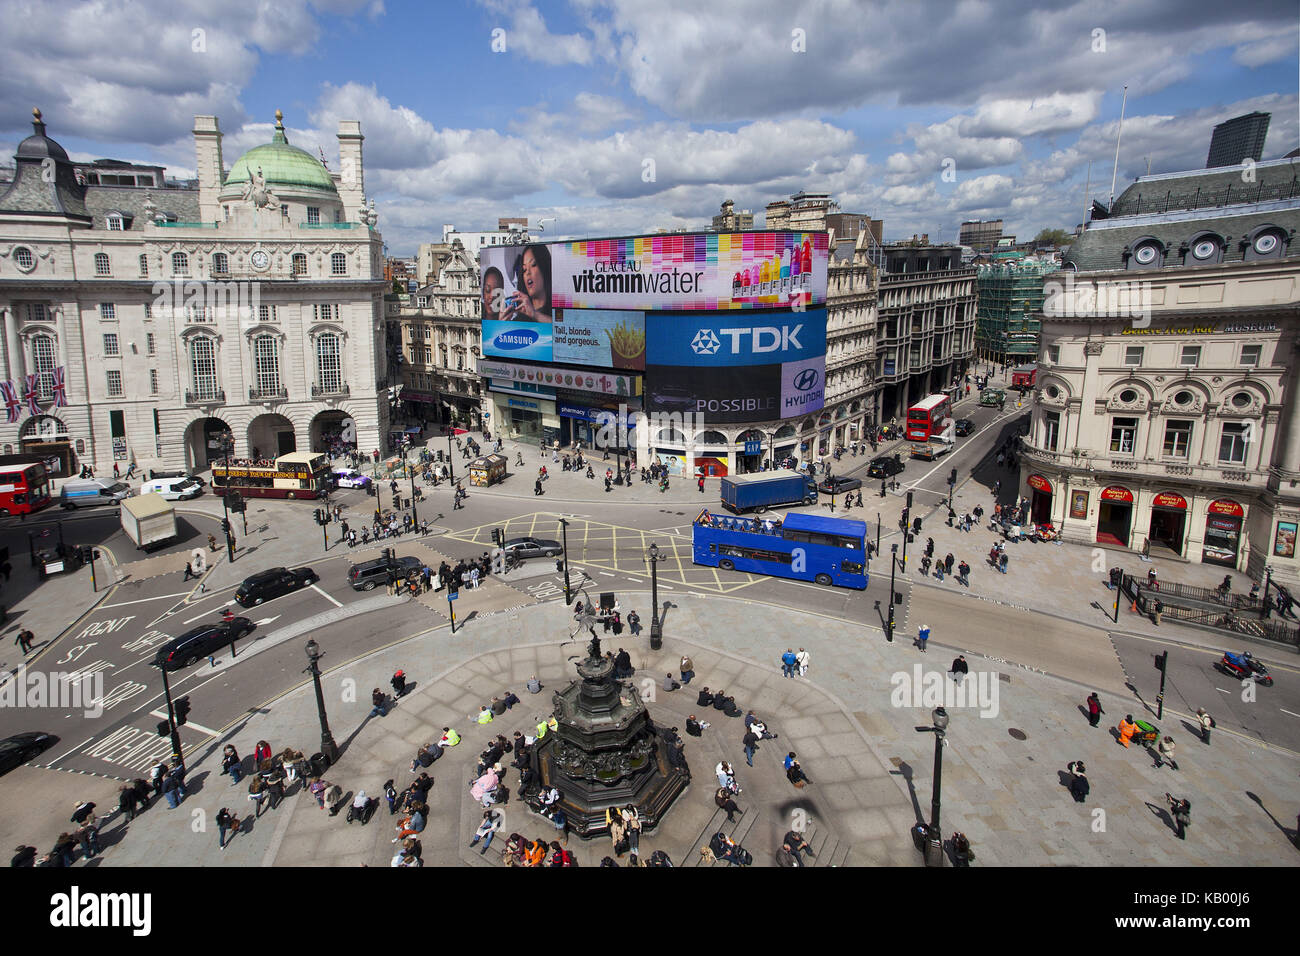 Grande Bretagne, Londres, Piccadilly Circus, Banque D'Images